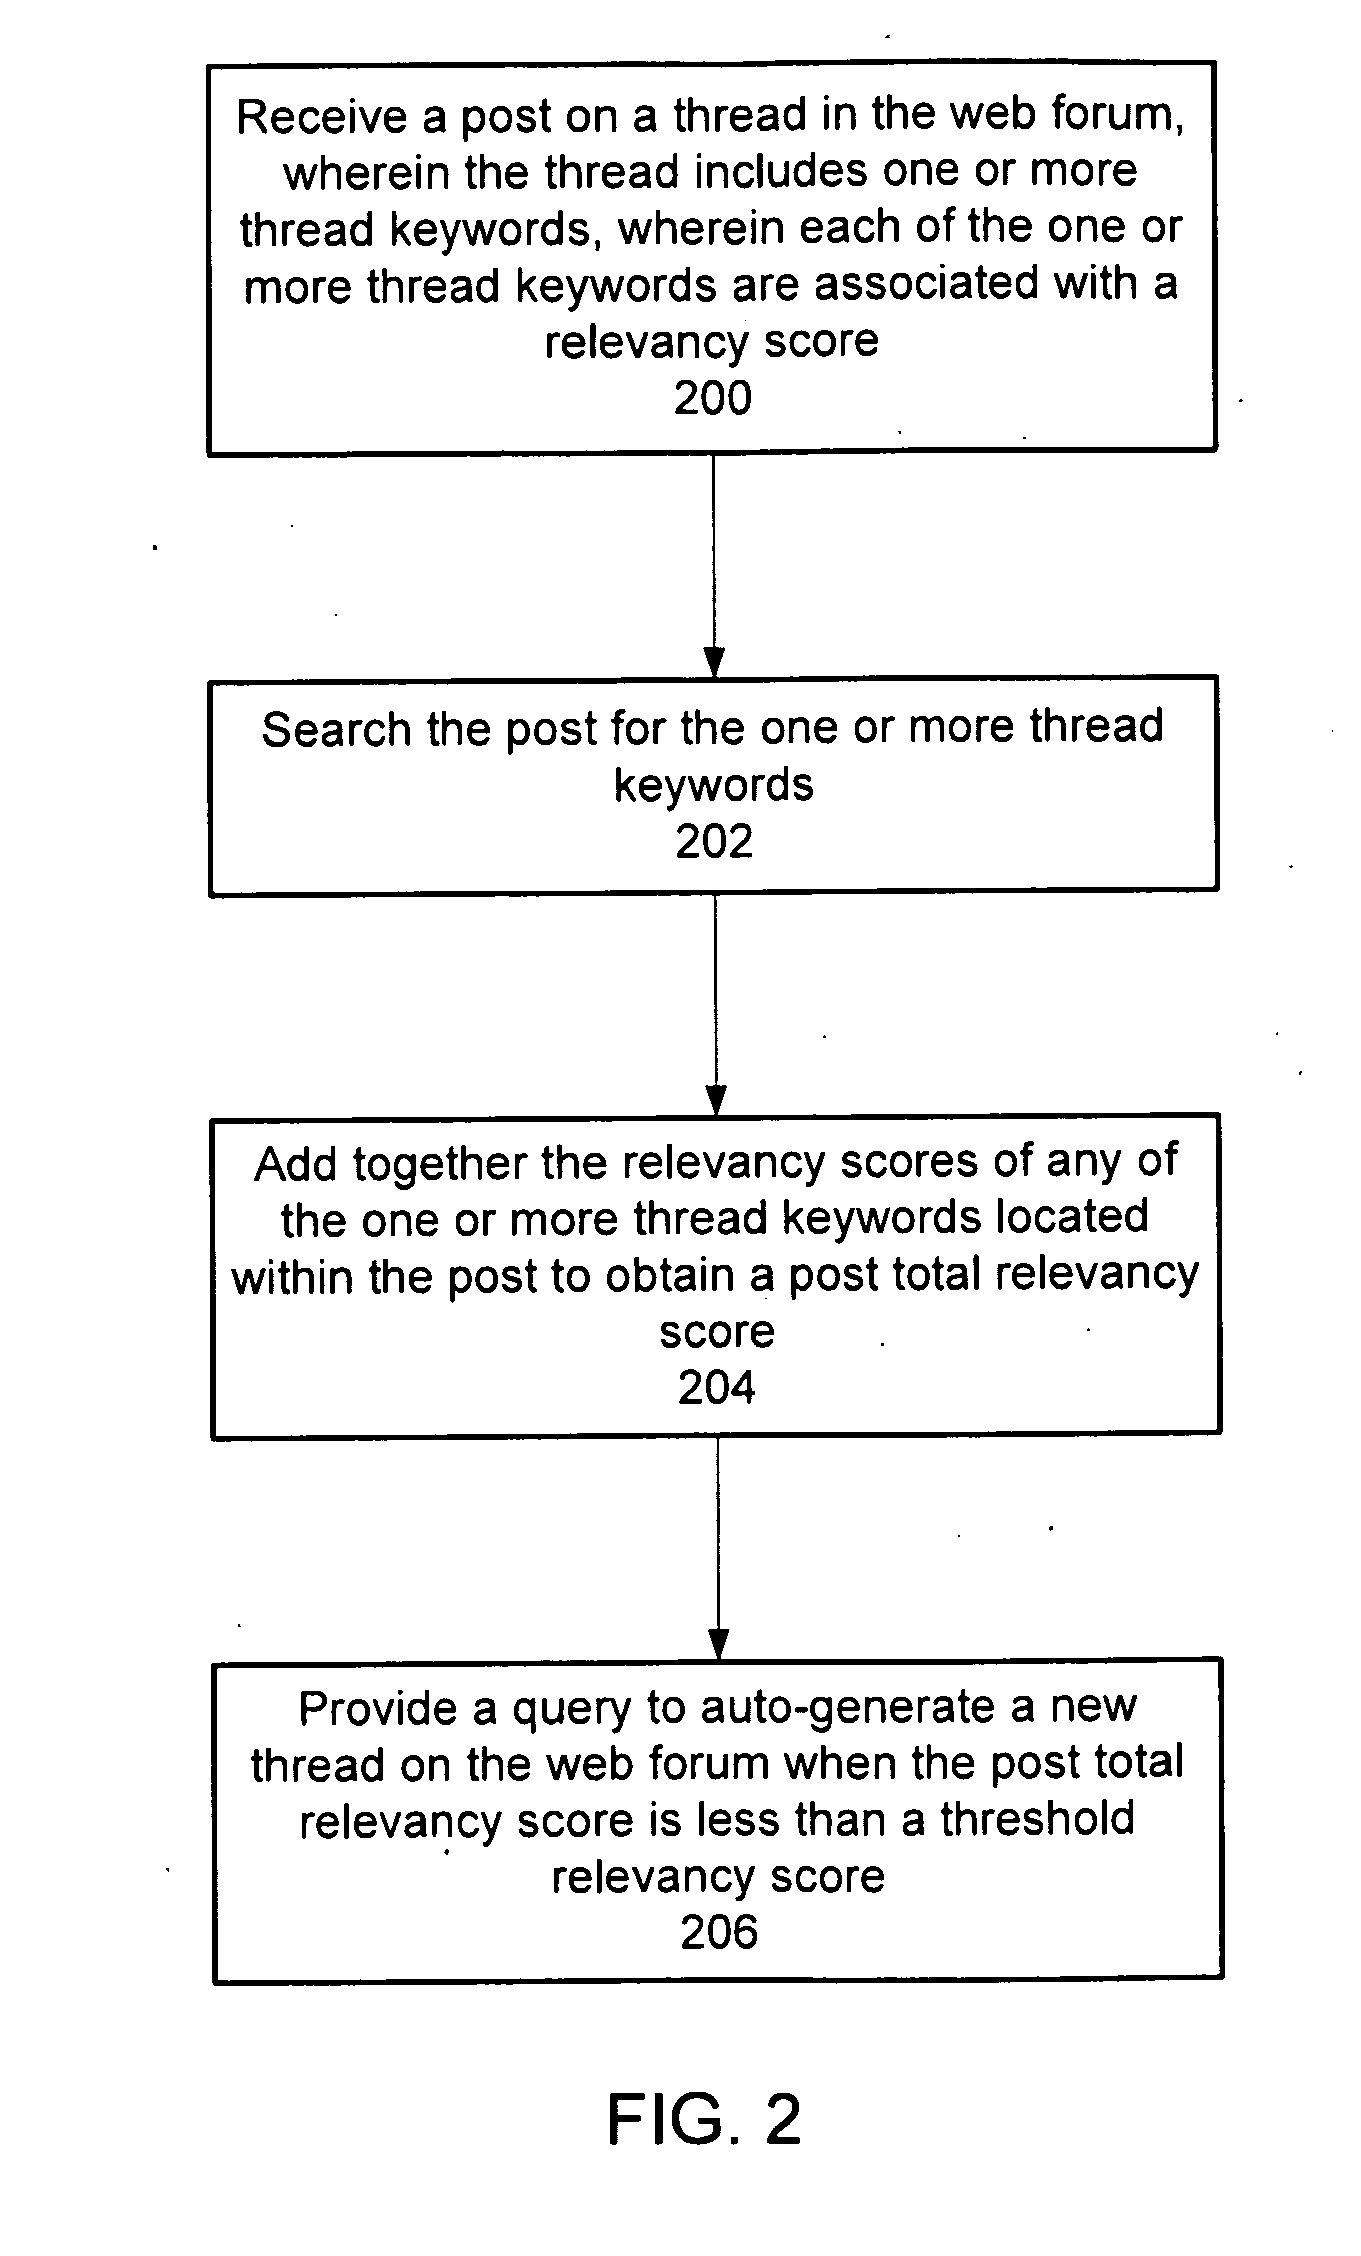 System and method for providing an option to auto-generate a thread on a web forum in response to a change in topic